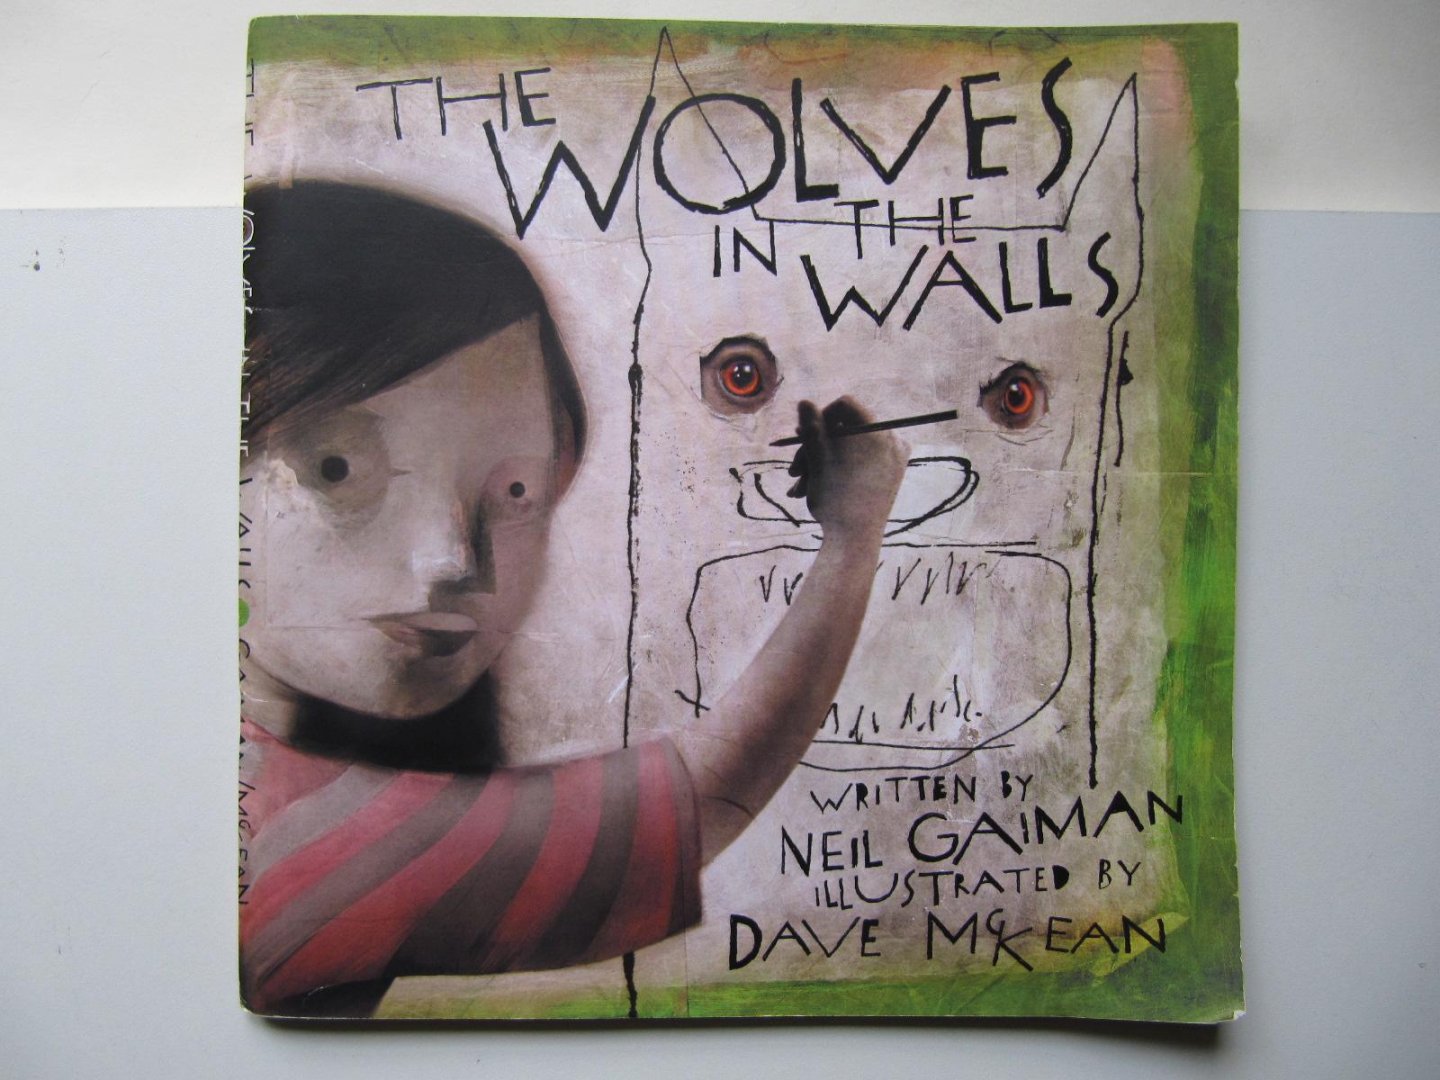 Neil Gaiman - The wolves in the walls